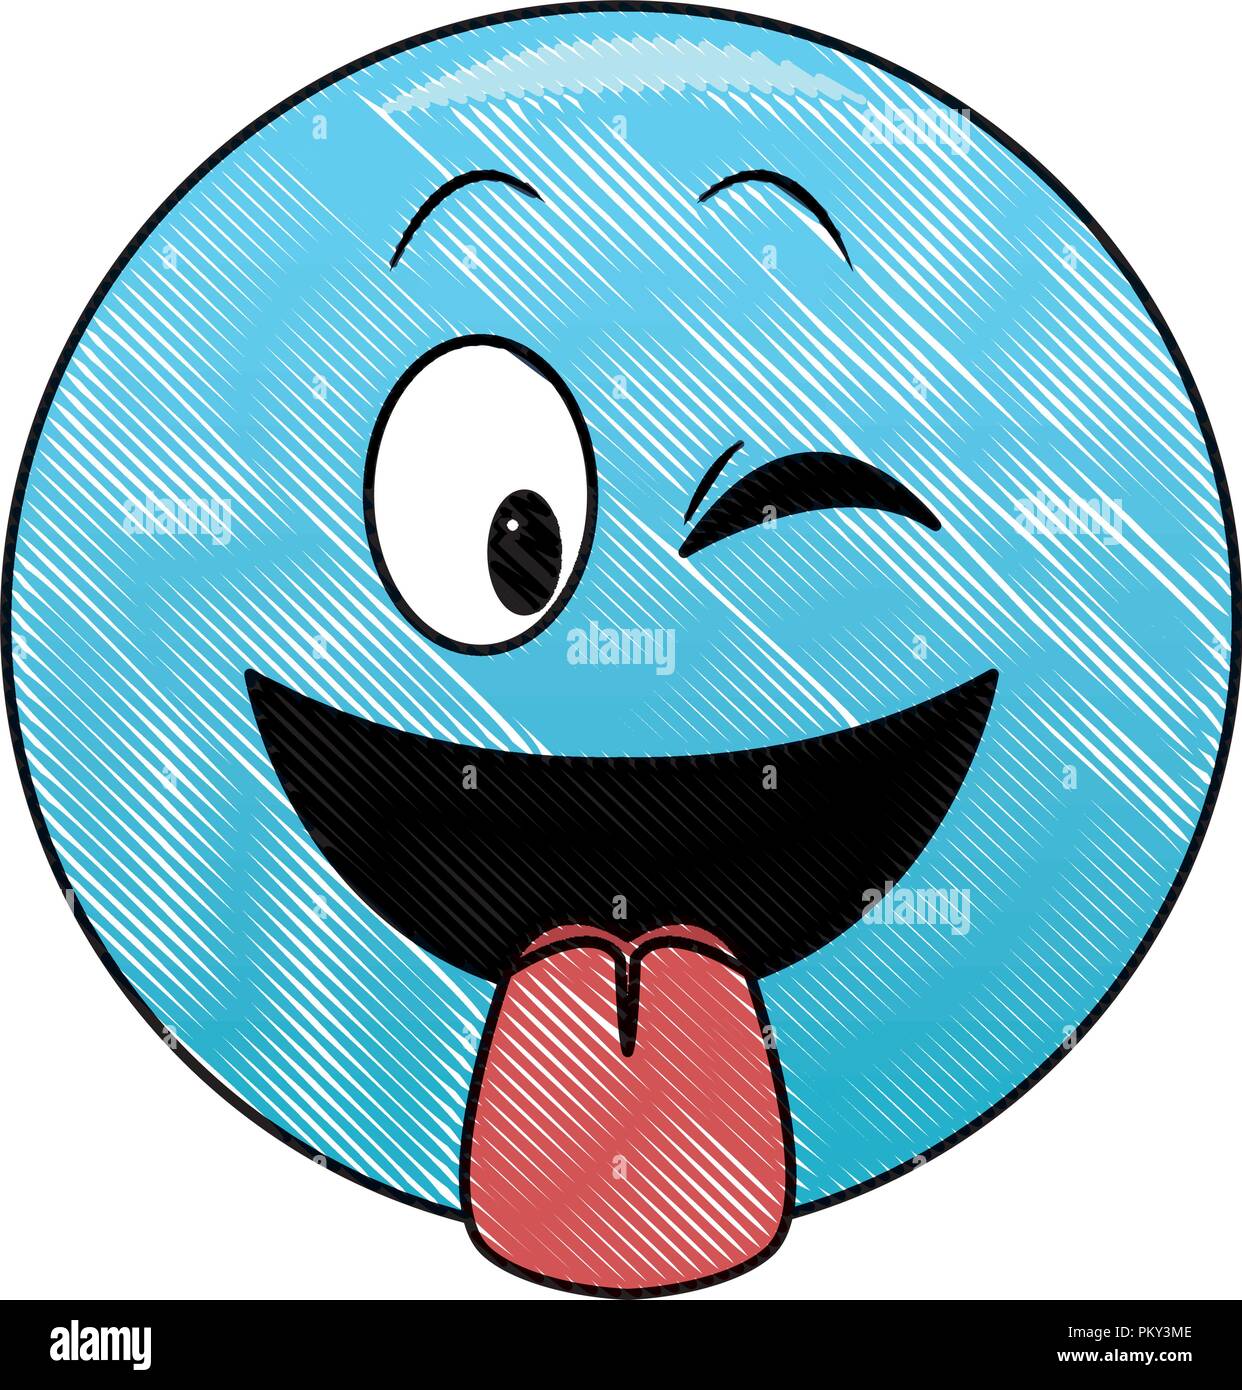 Tongue out chat emoticon scribble Stock Vector